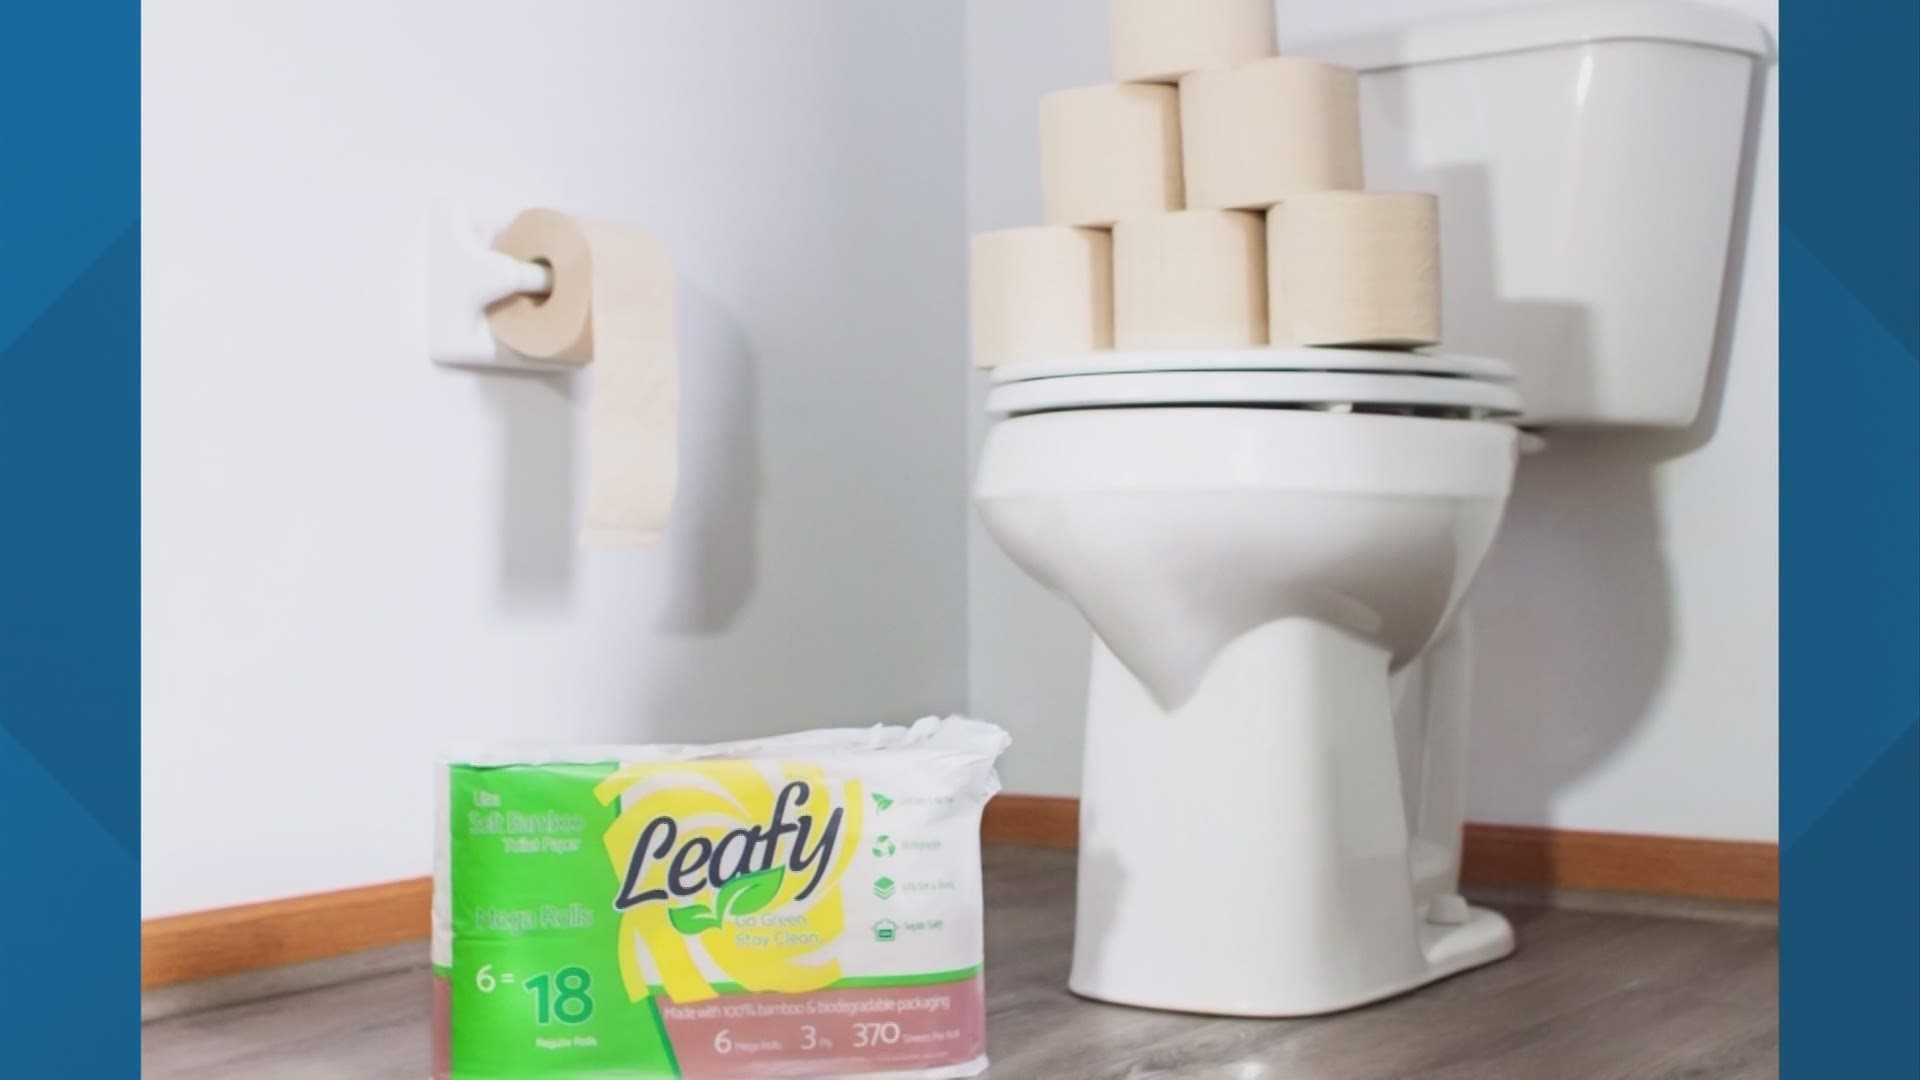 A group of friends create an eco-friendly toilet paper company.